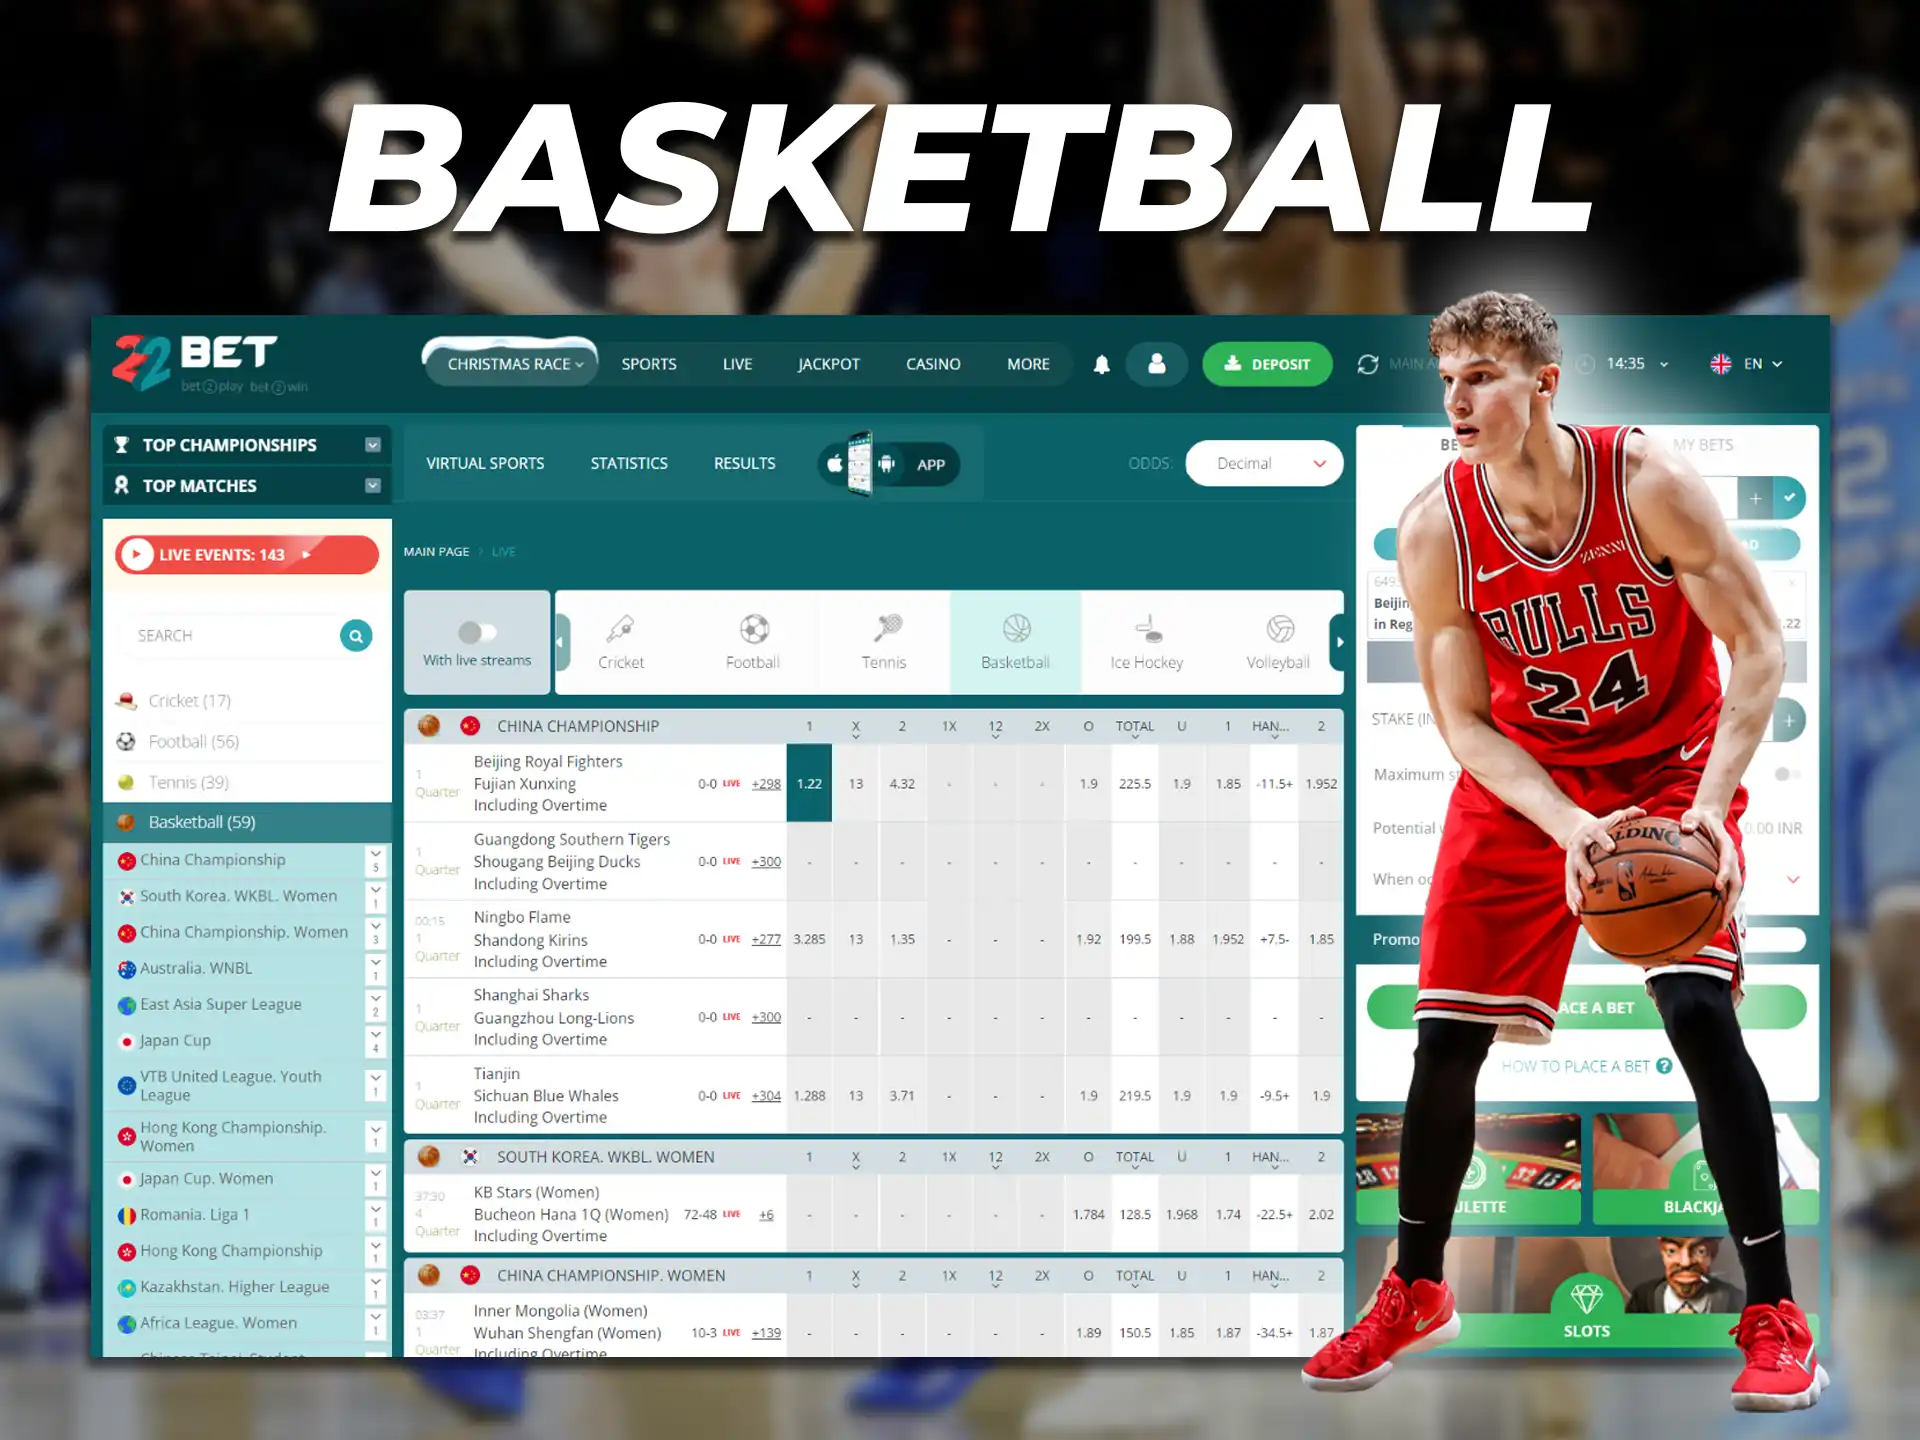 Betting on basketball and basketball teams and events is very popular among Indian bettors.